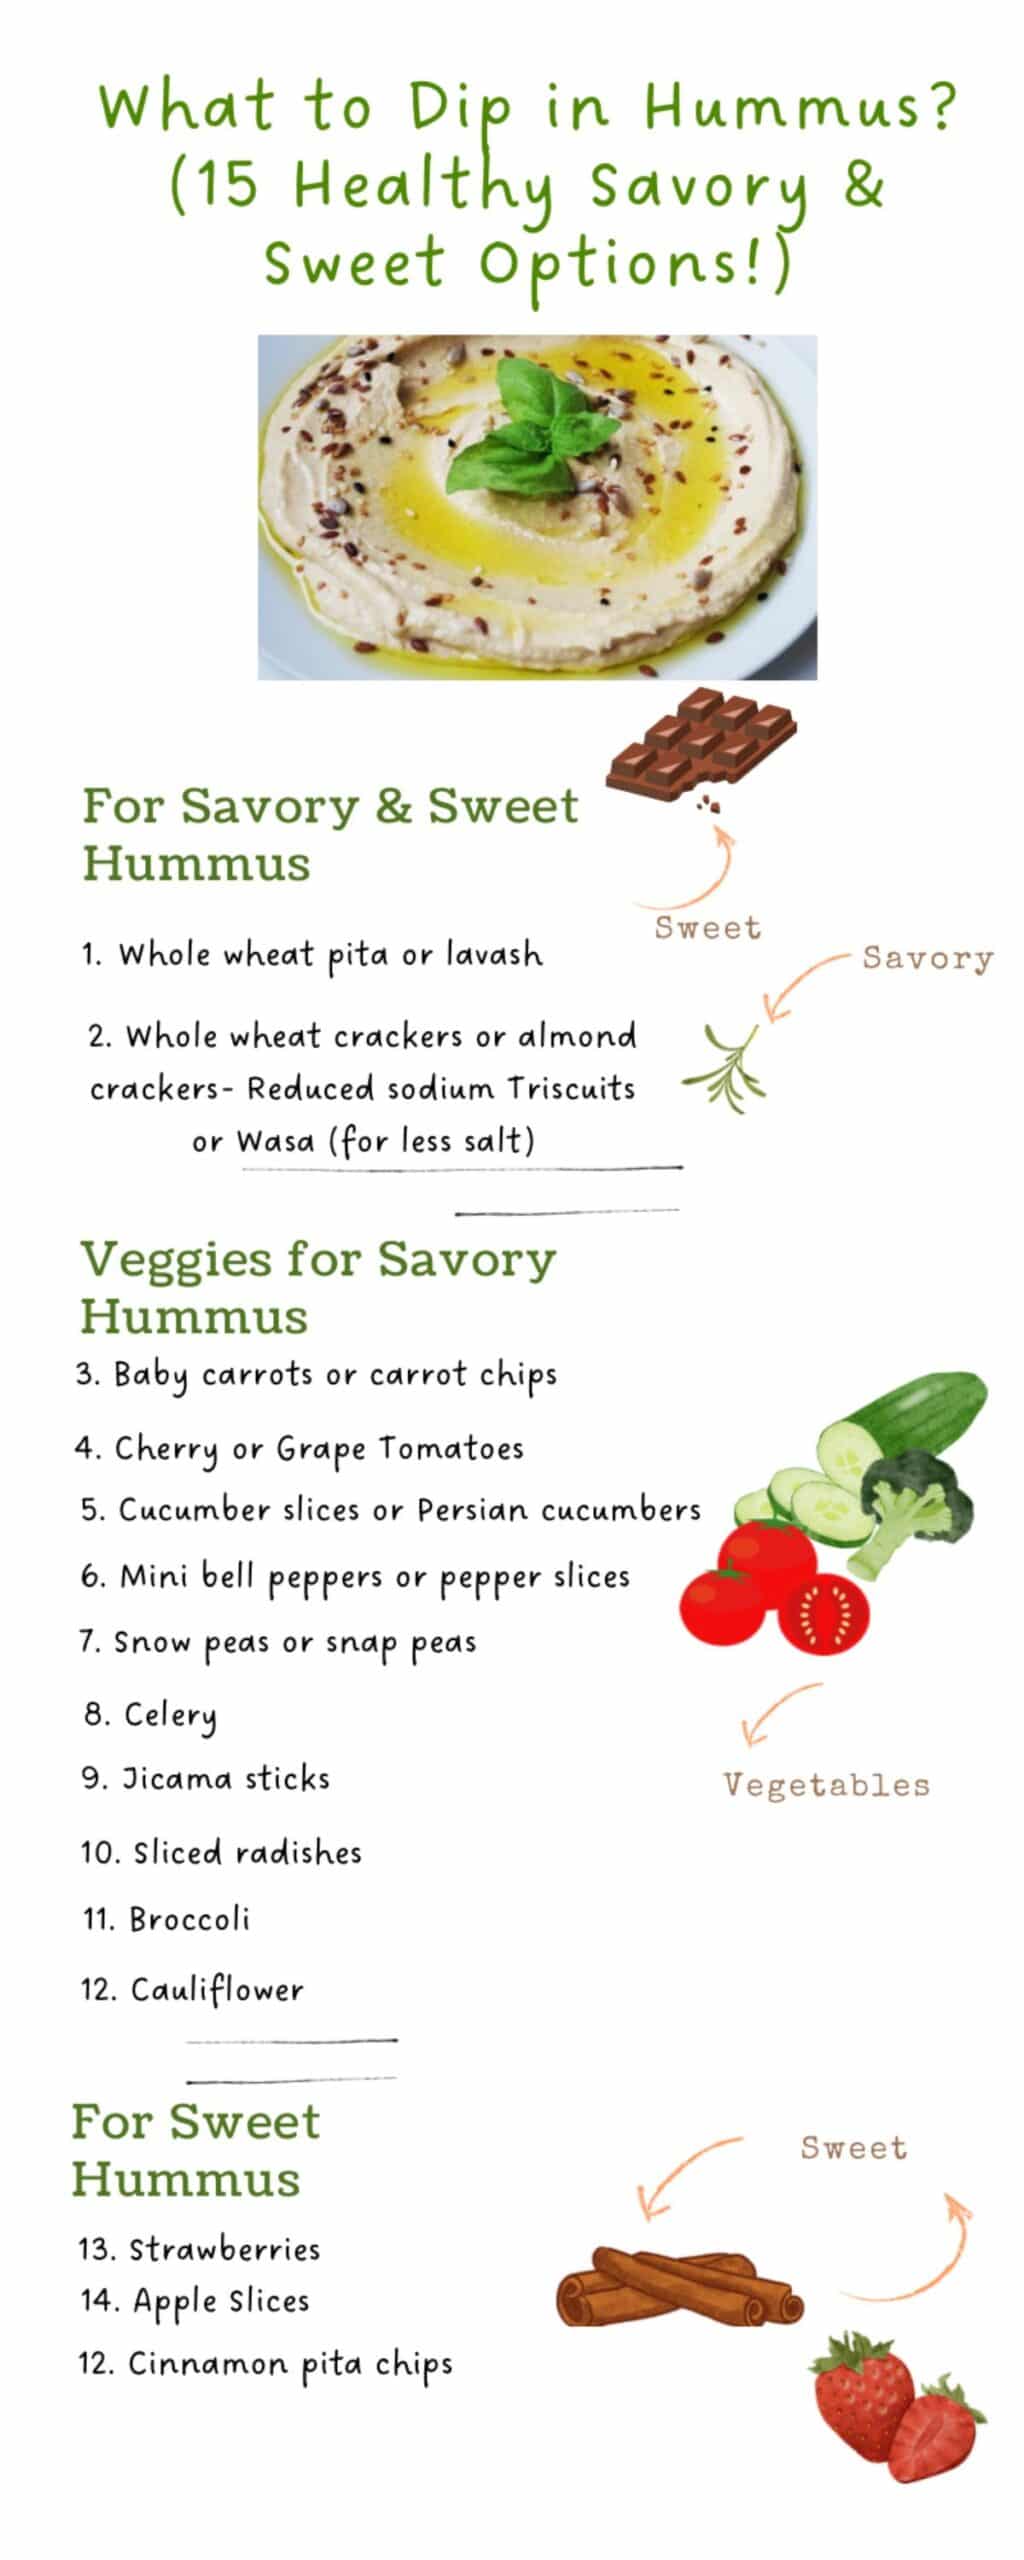 Infographic listing what to dip in hummus, healthy savory and sweet options.